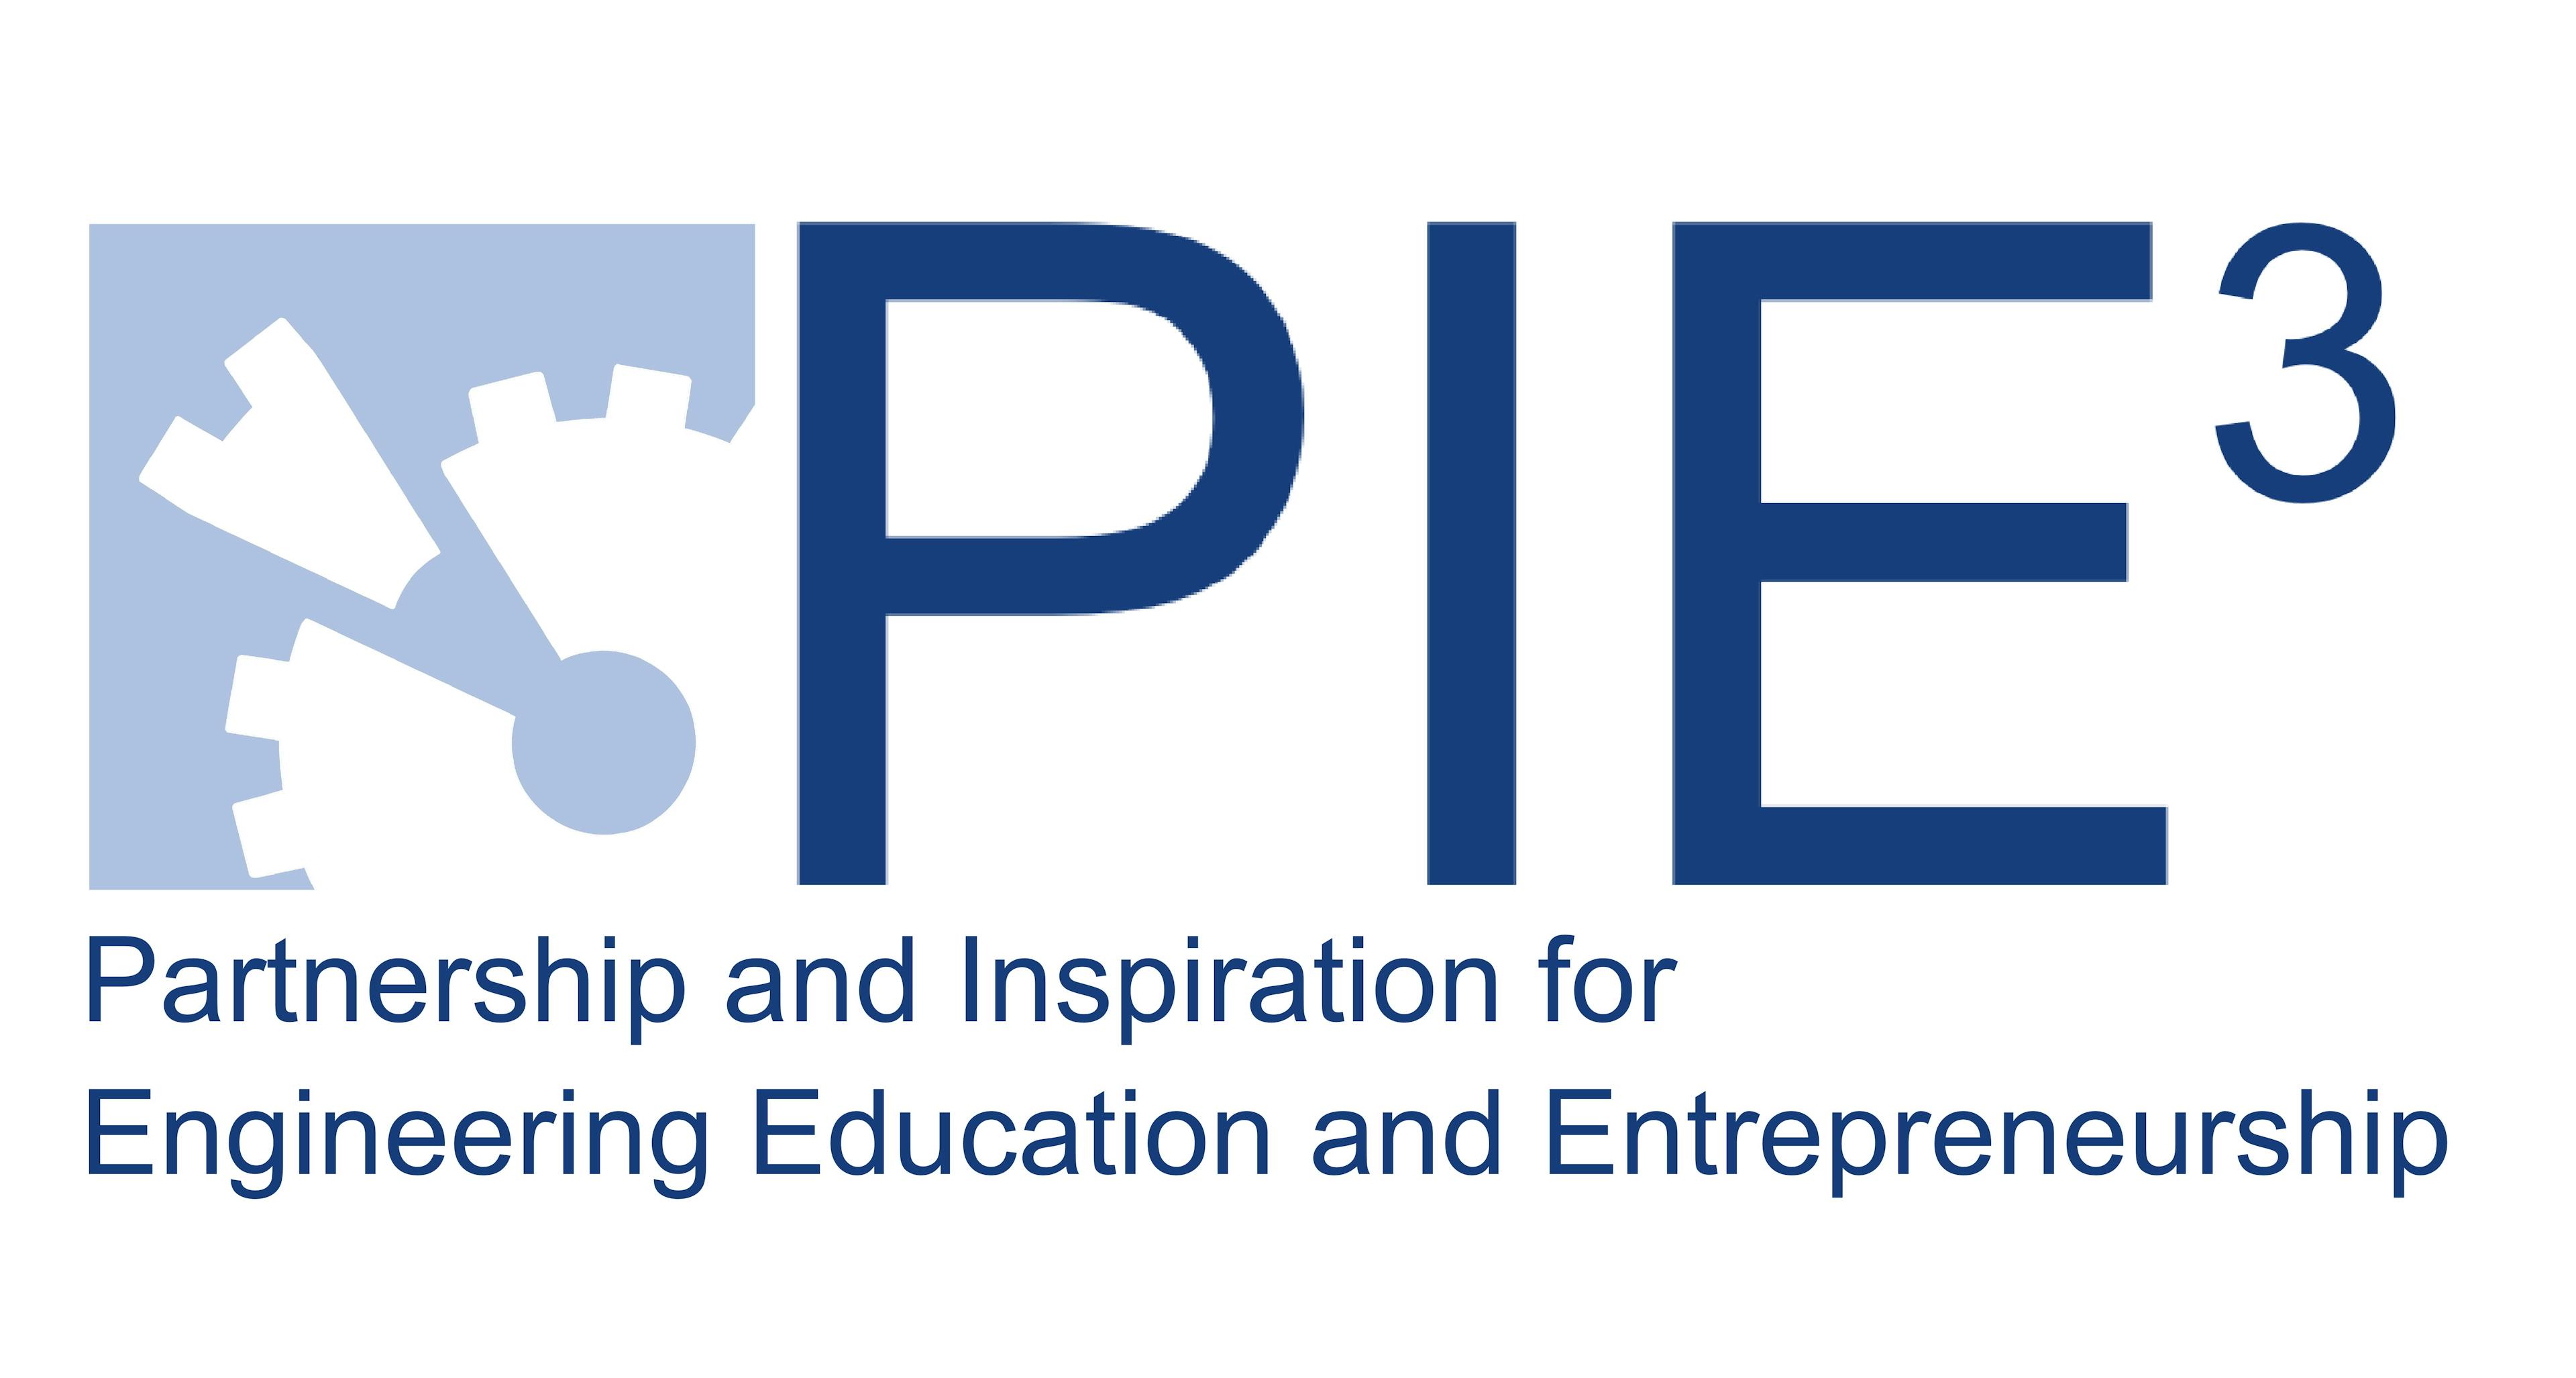 The Partnership and Inspiration for Engineering Education and Entrepreneurship is the non-profit organization that houses our team.